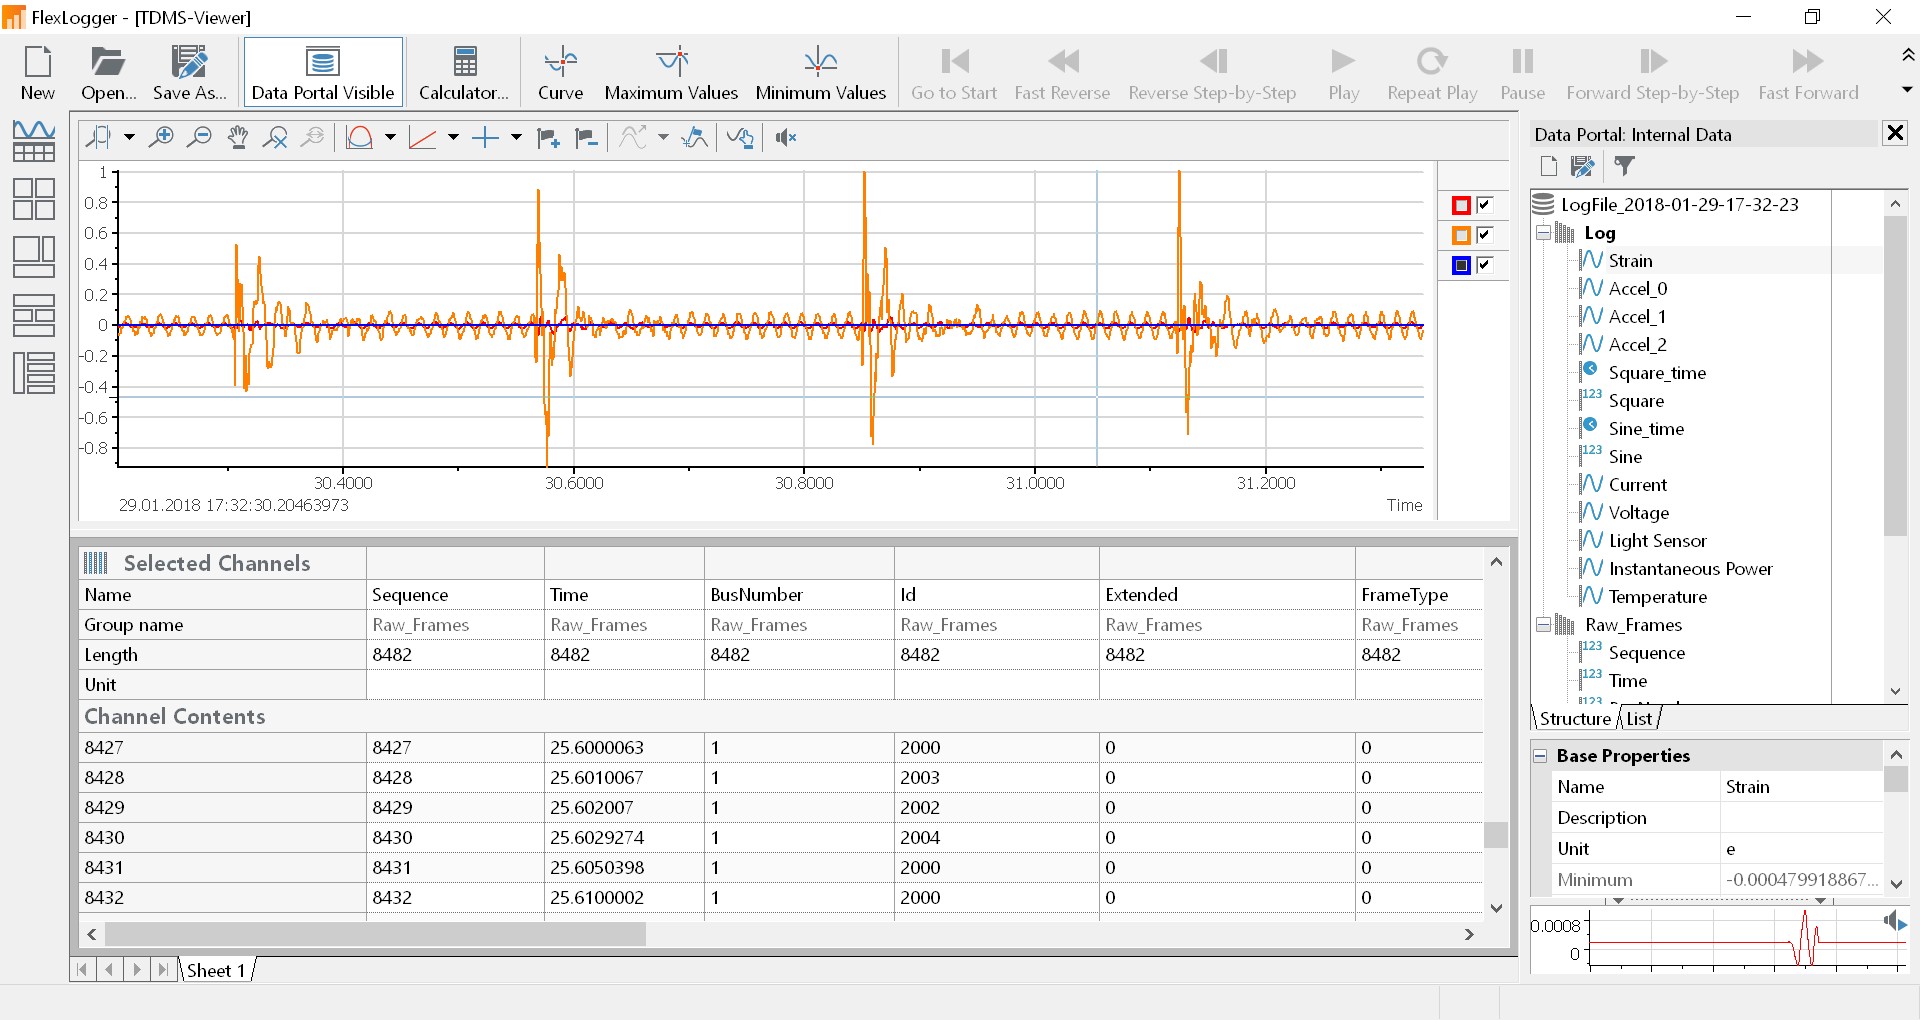 View CAN data alongside other data in the FlexLogger TDMS Viewer